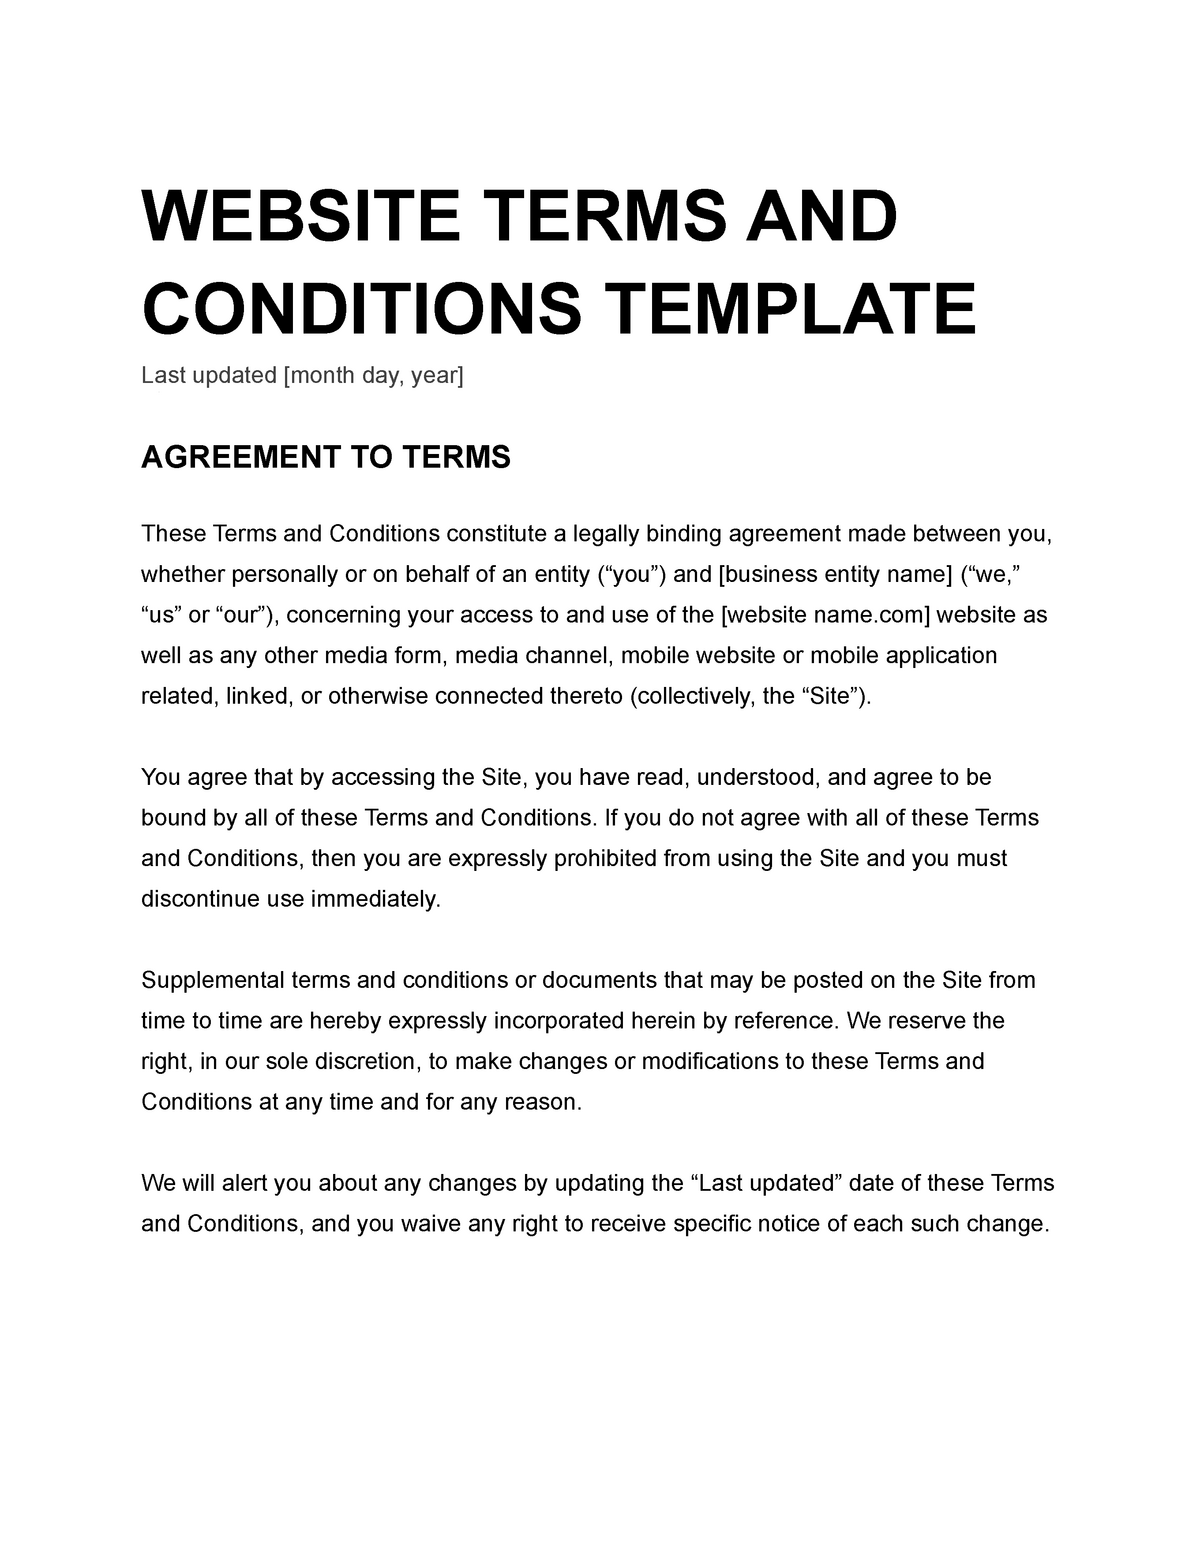 Sample Terms of Use Template and Guide - Termly